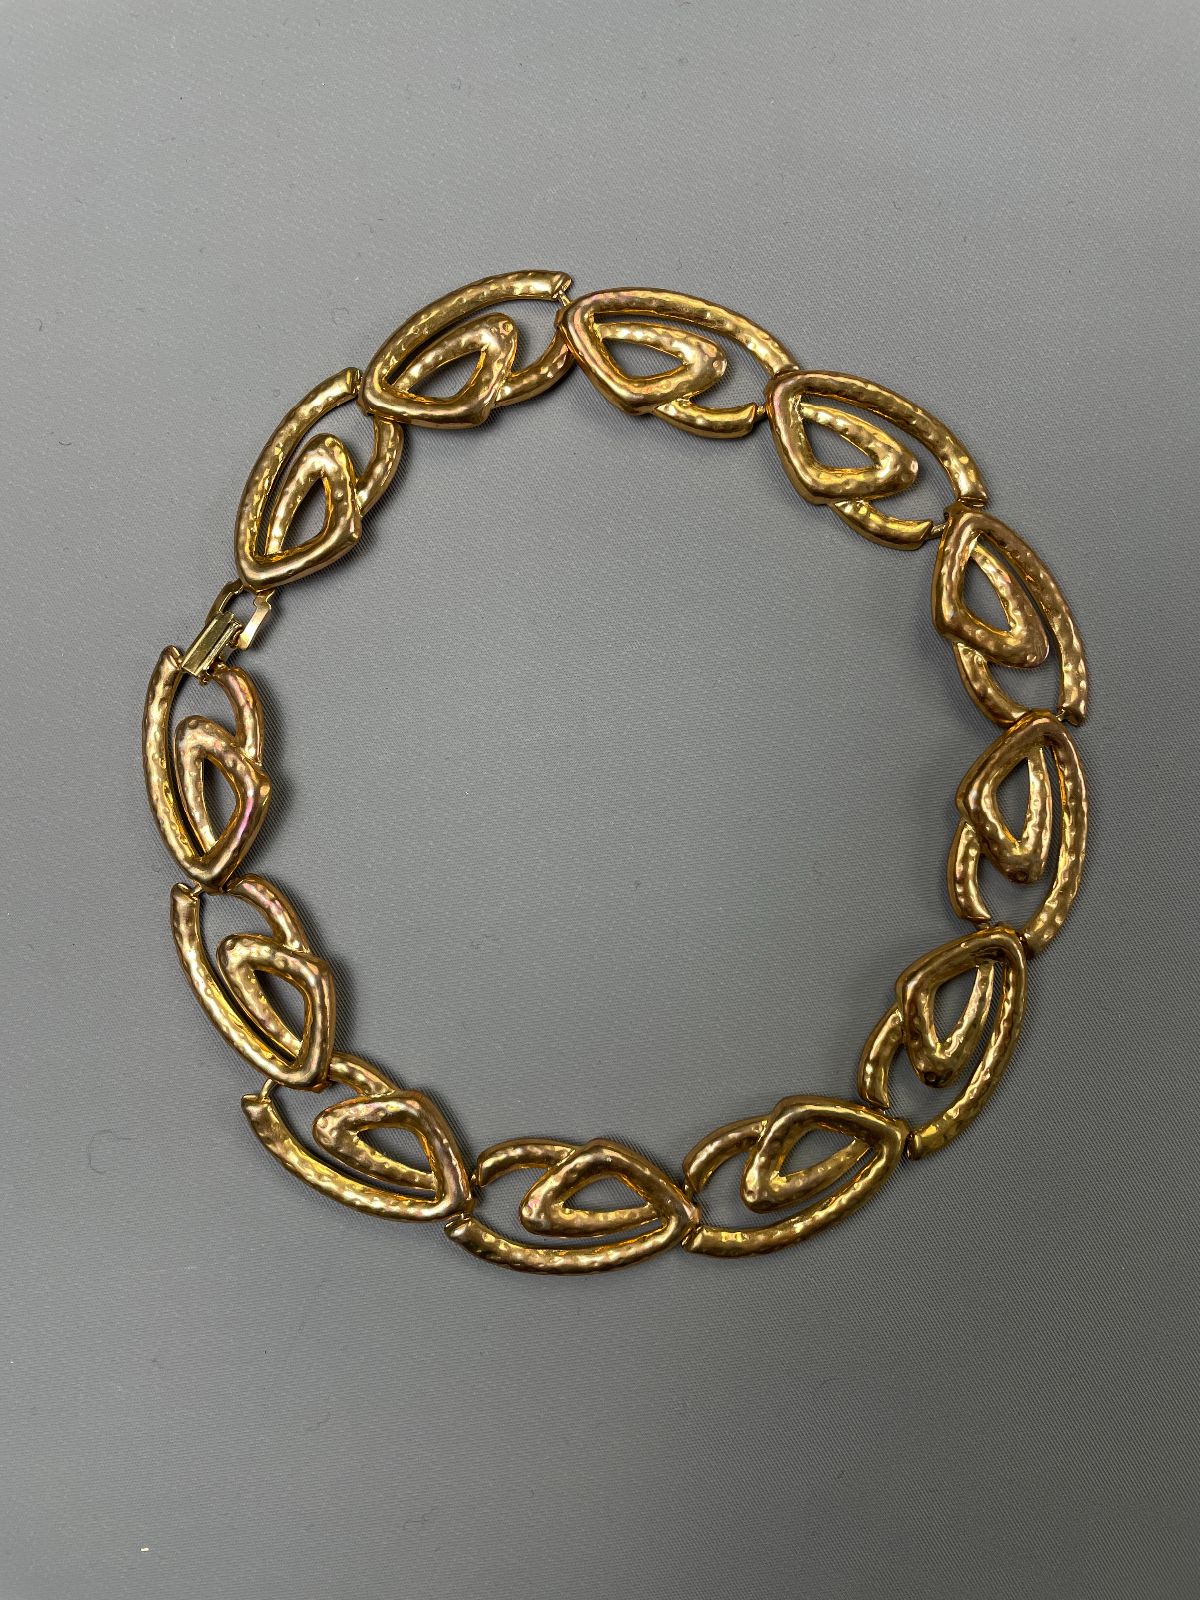 product details: ABSTRACT SPIRAL SHAPE HAMMERED GOLD CHAIN LINK CHOKER NECKLACE photo